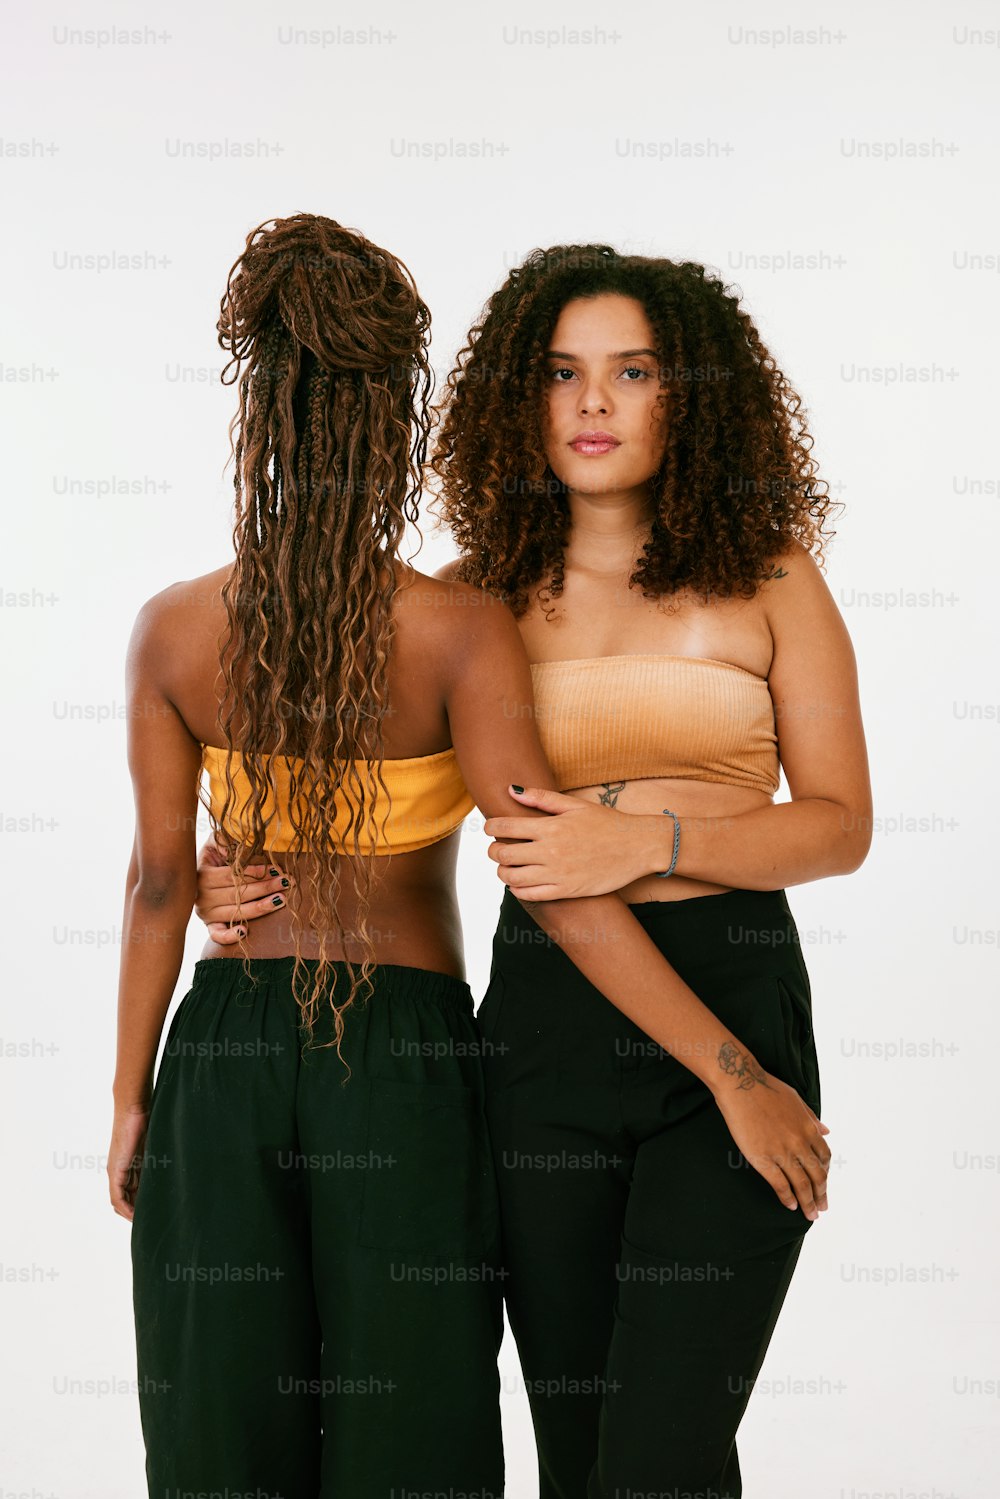 two women standing next to each other in front of a white background